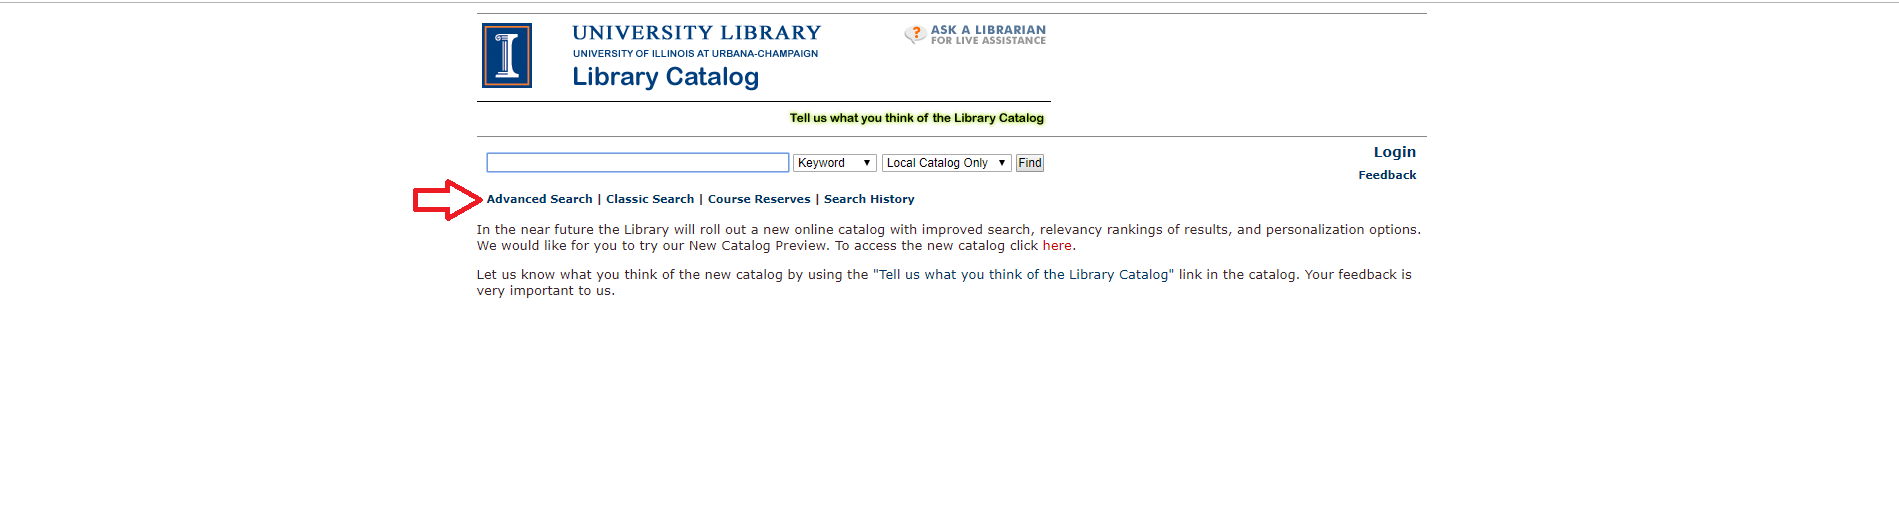 A red arrow points to the Advanced Search option on the Library Catalog homepage